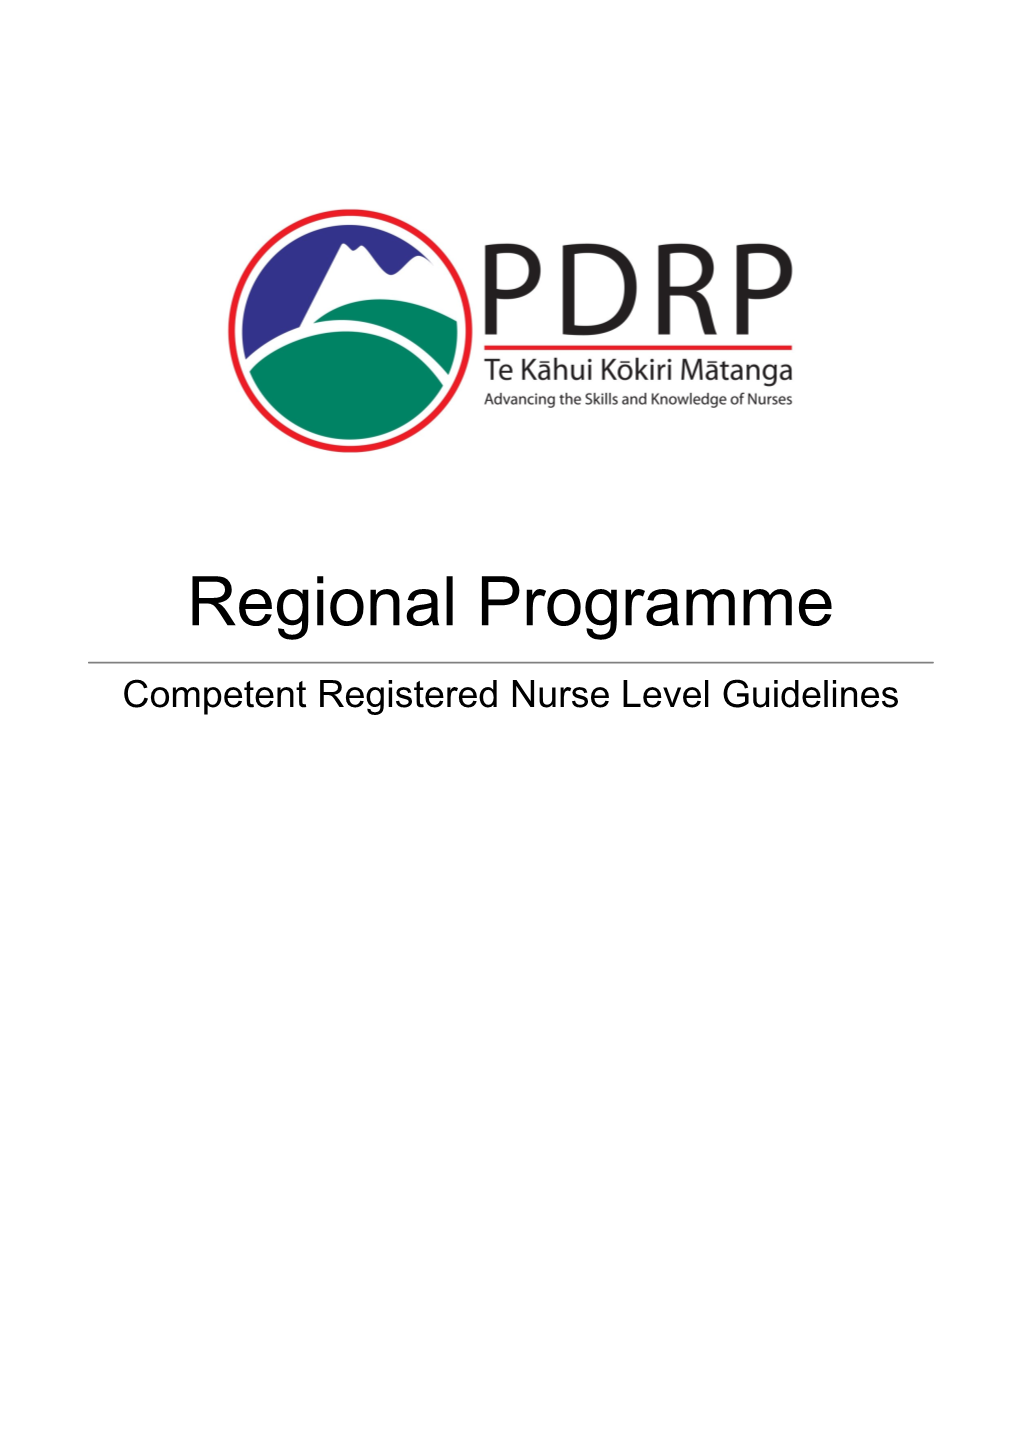 RN Competent Level PDRP Guidelines